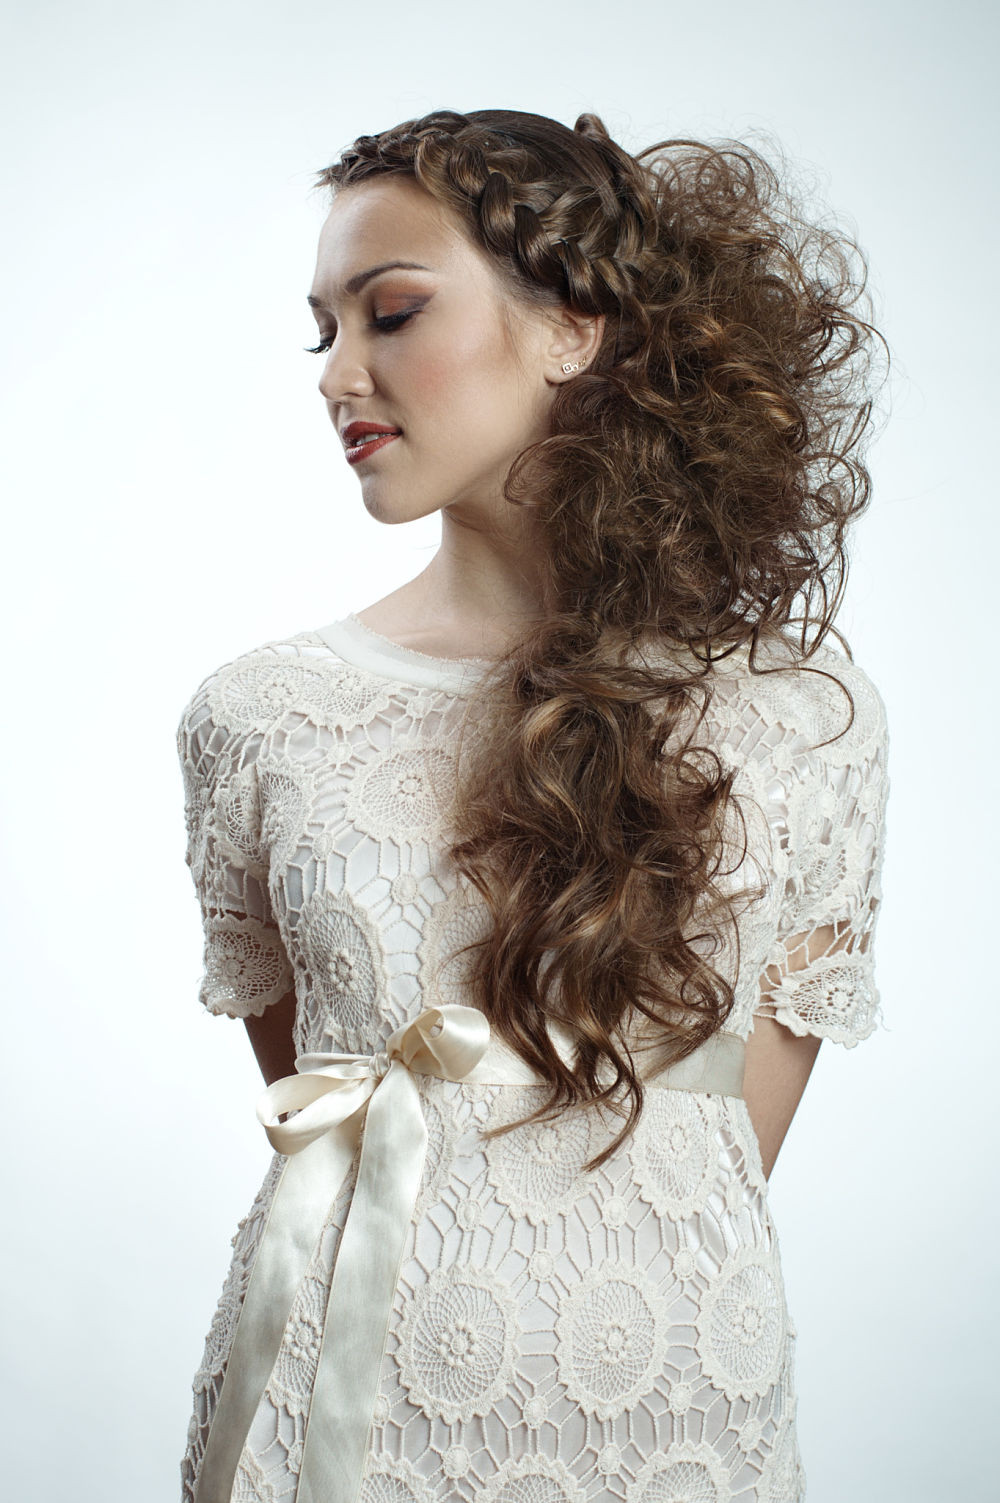 Prom Hairstyles Curled Hair
 Let’s Turn Some Heads DIY Prom Hairstyle ´Dos For Curly